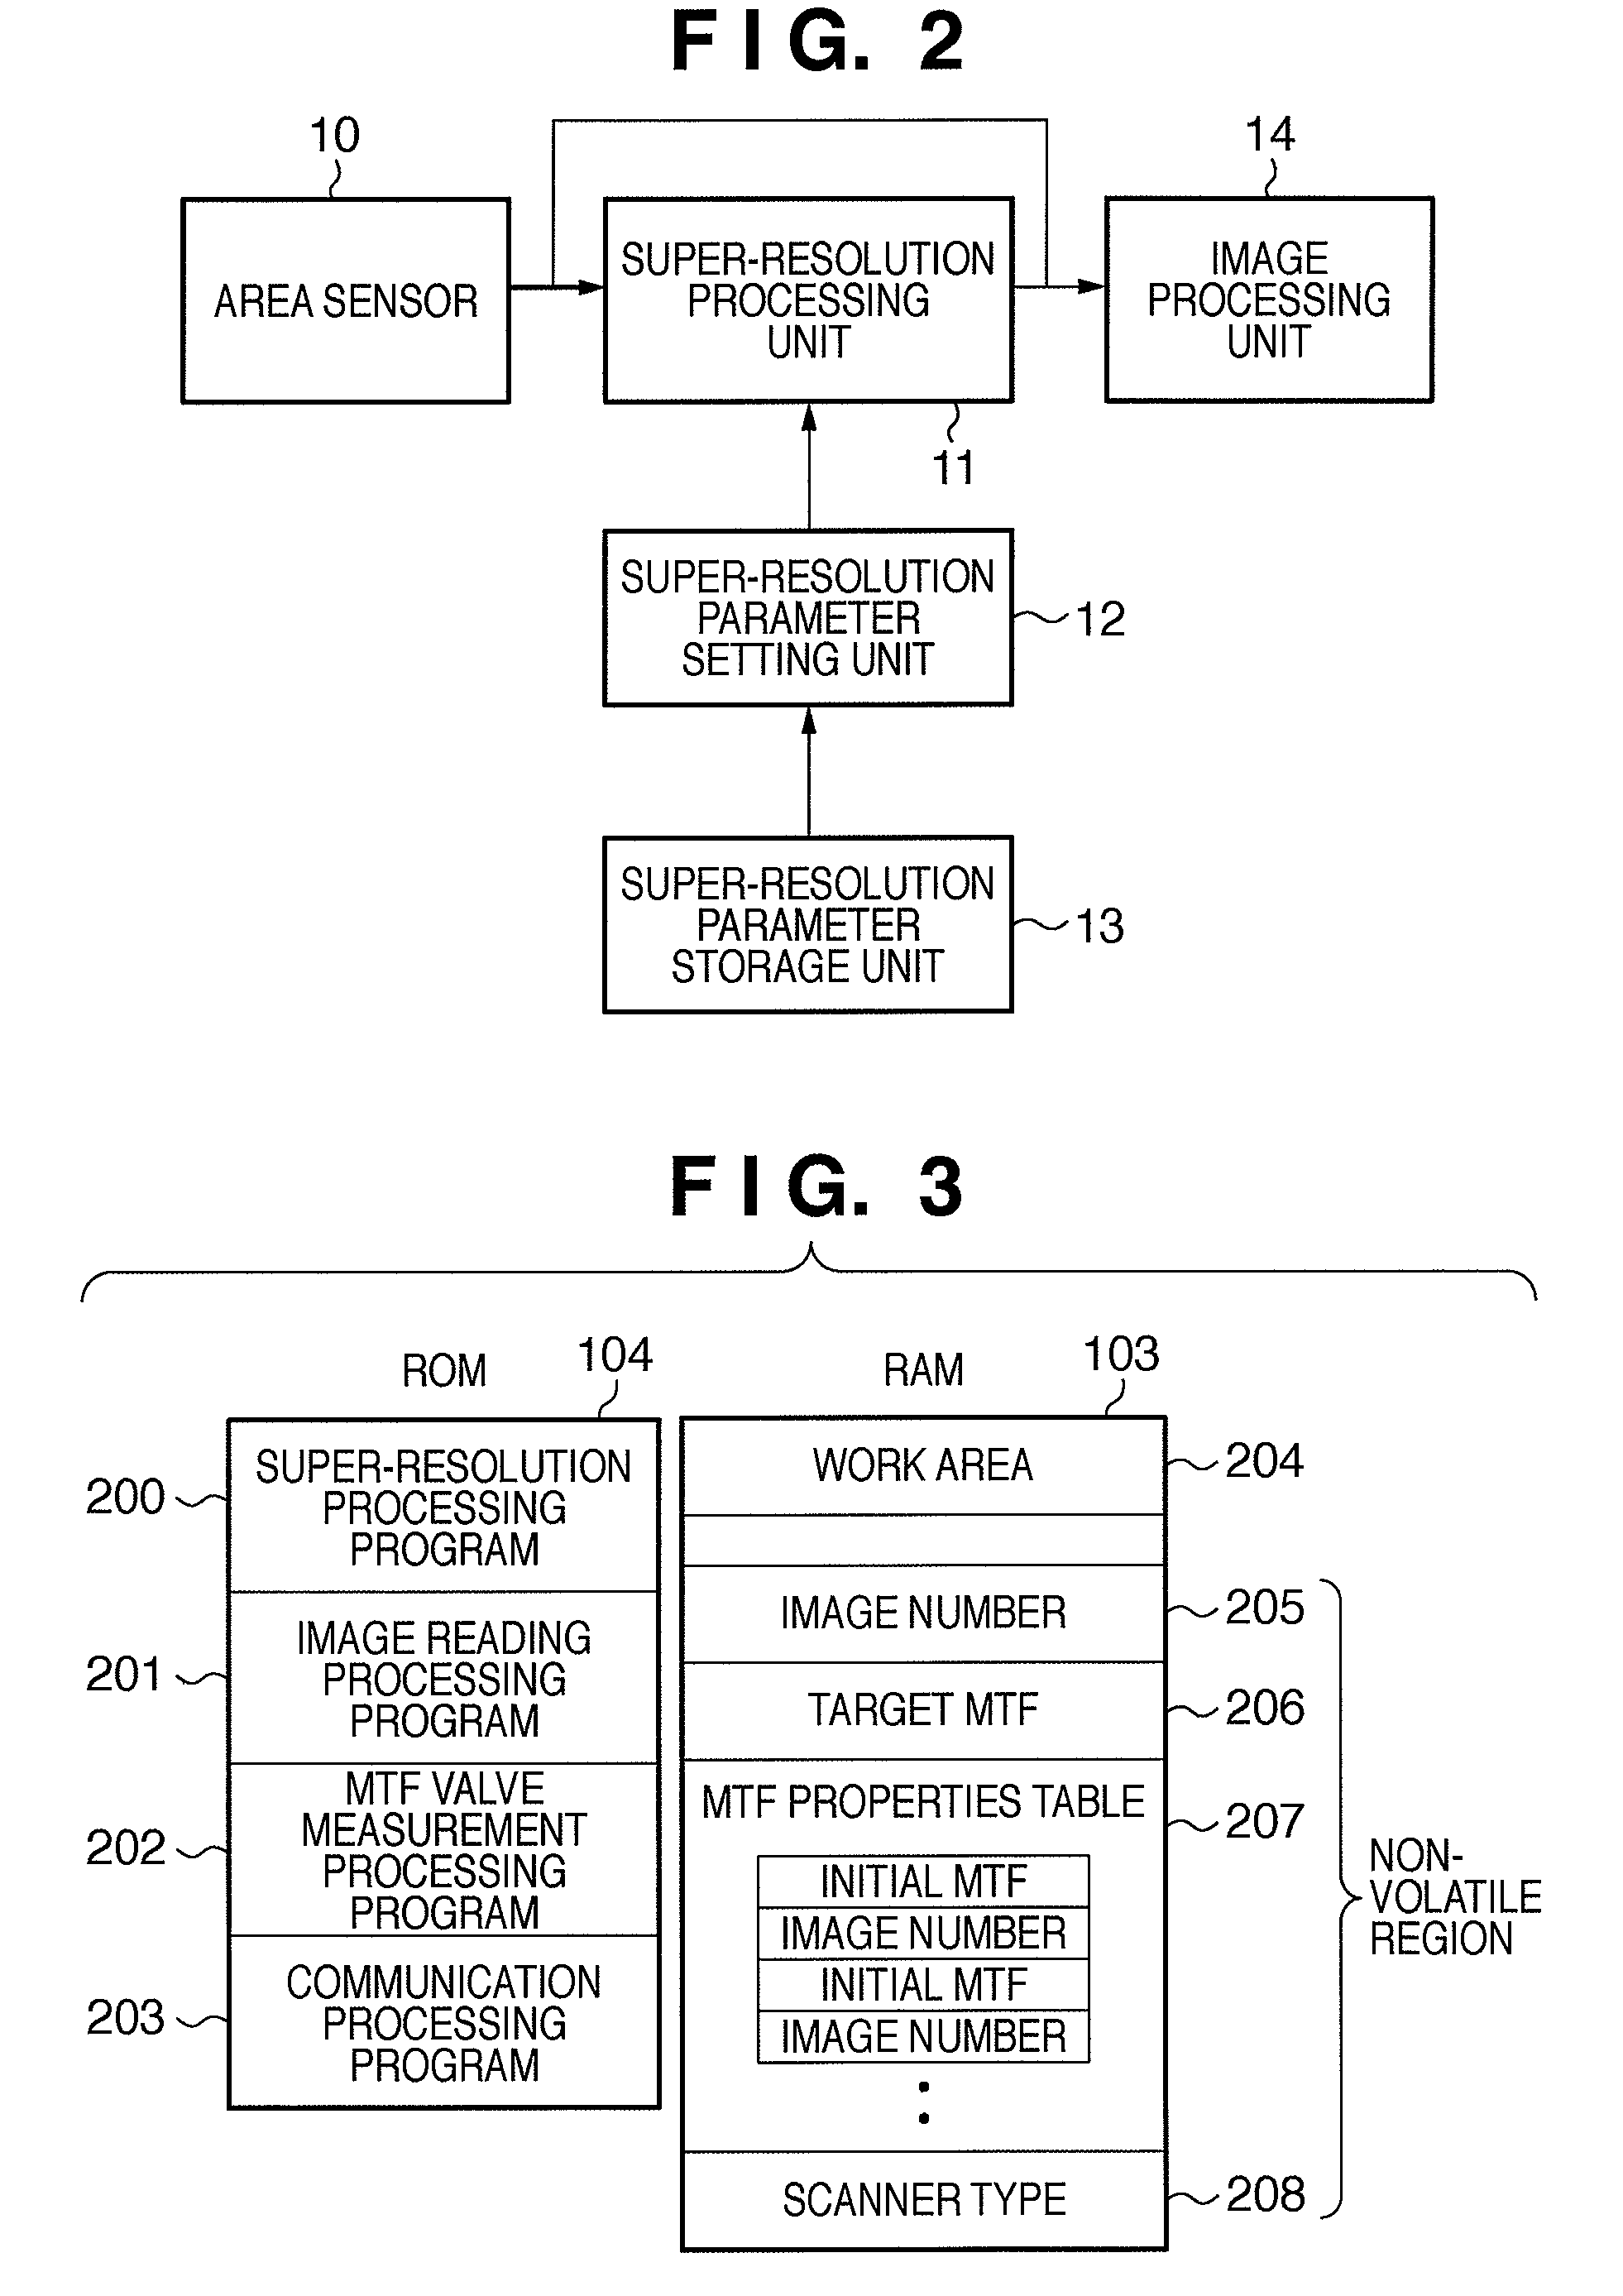 Managing modulation transfer function values for image data